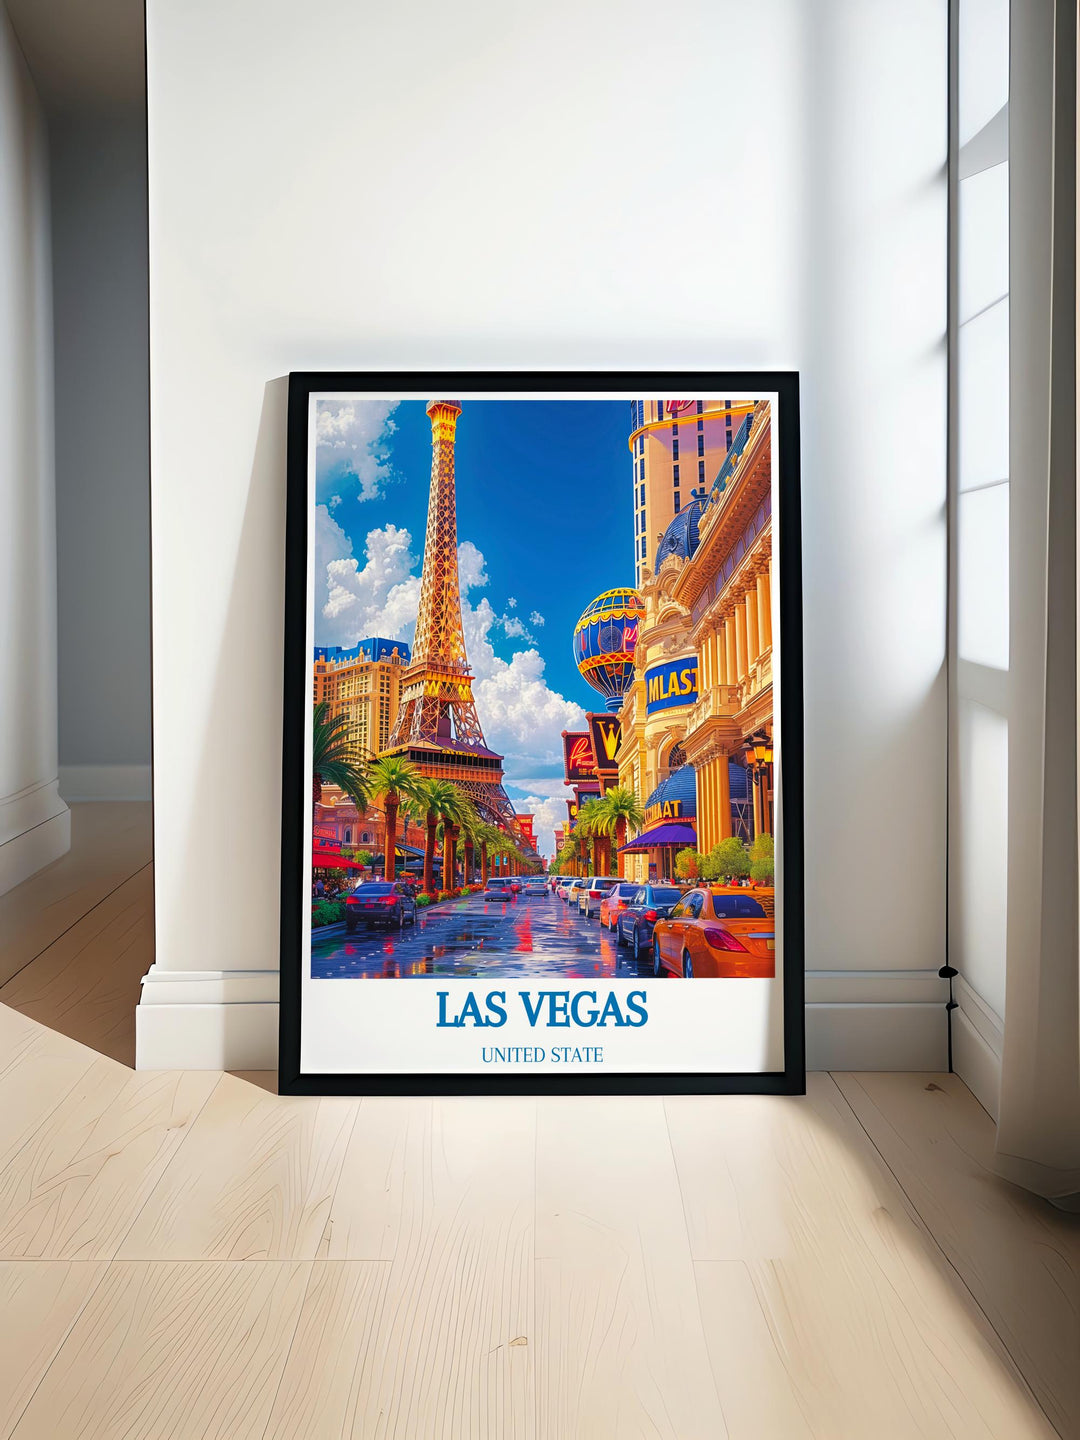 Fine art print of the Las Vegas Strip, showing vibrant nightlife and iconic casinos, perfect for adding dynamic city vibes to your decor.